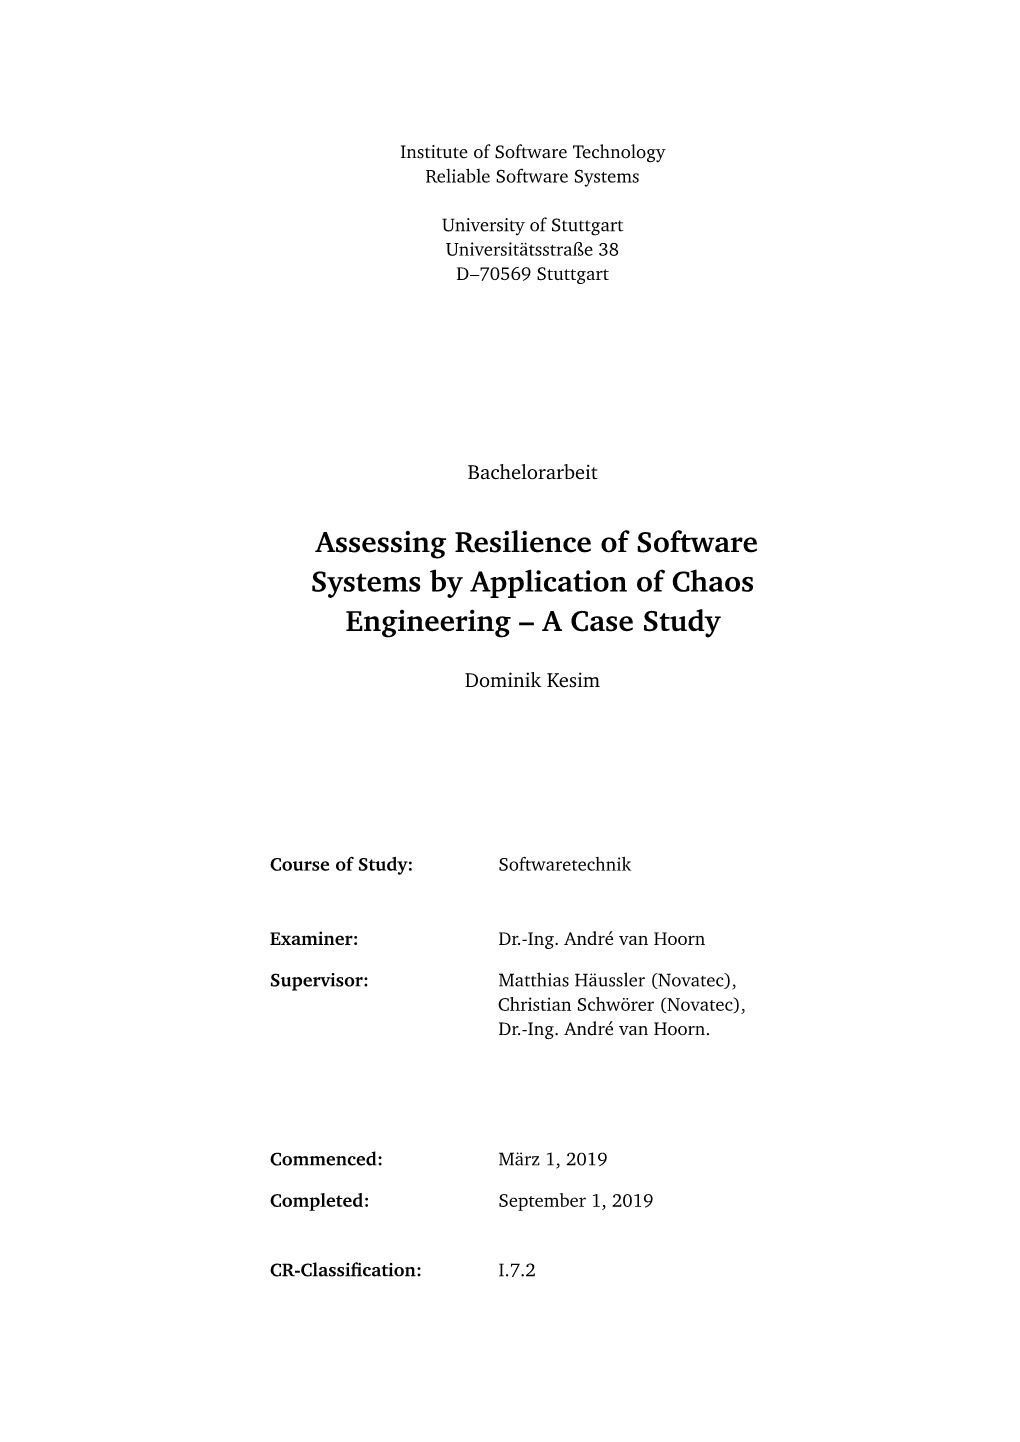 Assessing Resilience of Software Systems by Application of Chaos Engineering – a Case Study